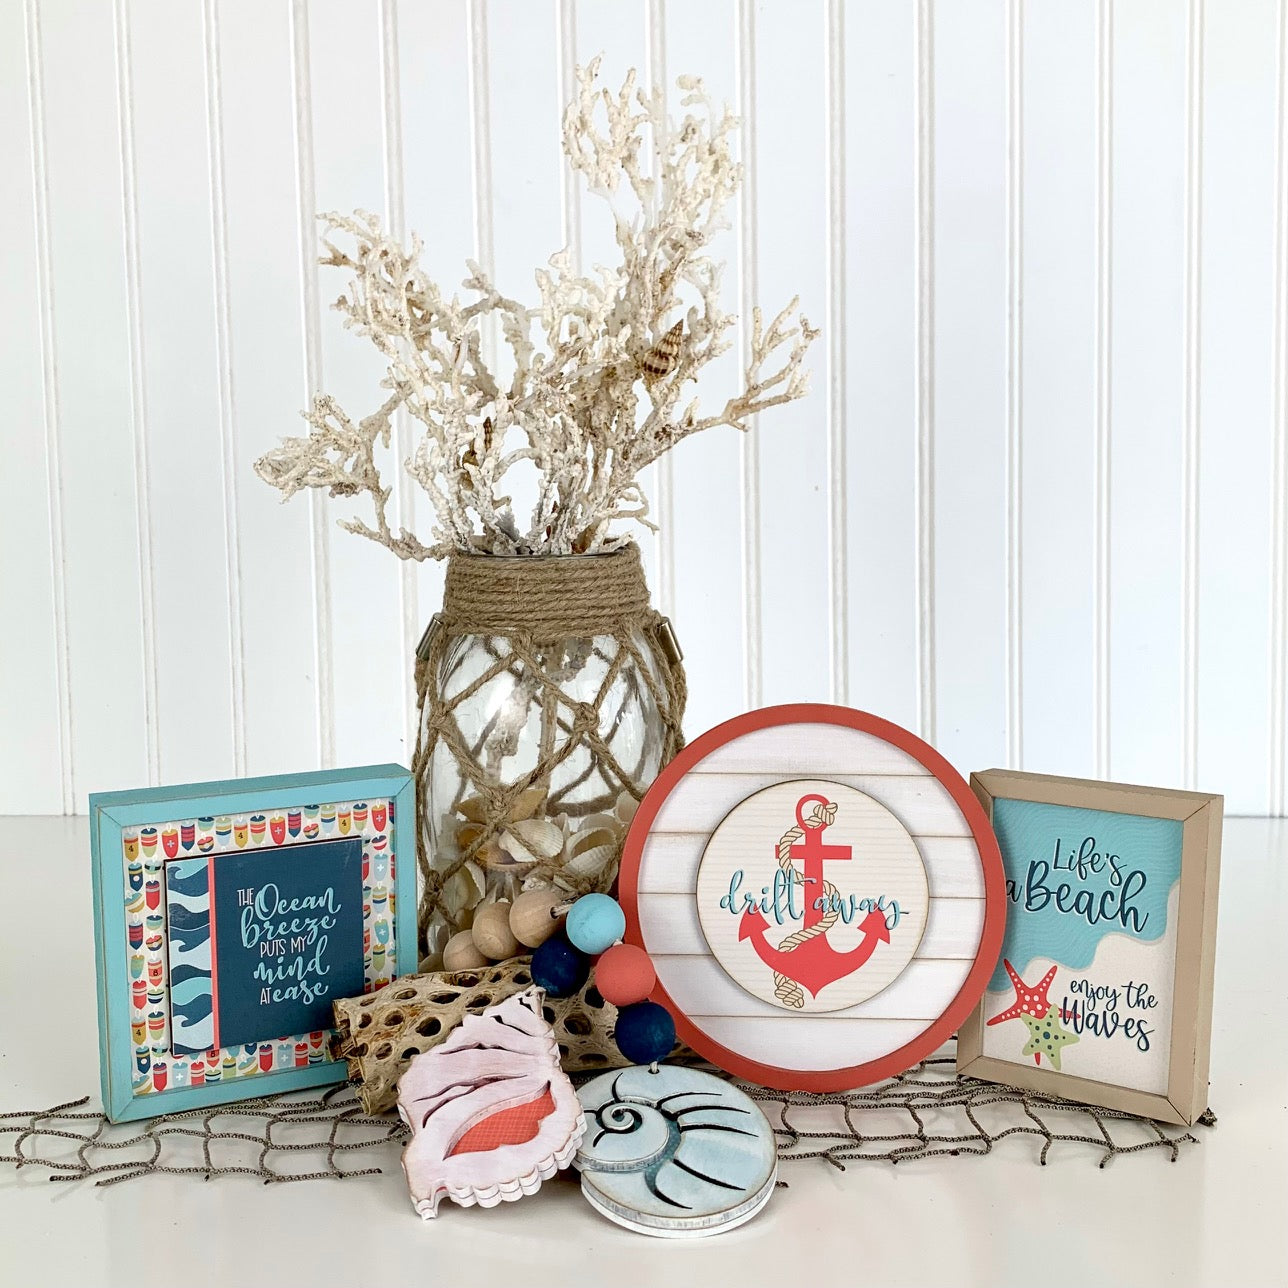 Nautical and beach themed shiplap signs for styling tiered trays, shelves, and mantels. Wood beaded garland with blue and coral seashells. Shiplap sign sign with anchor. Sign life's a beach, enjoy the waves. Drift away sign.